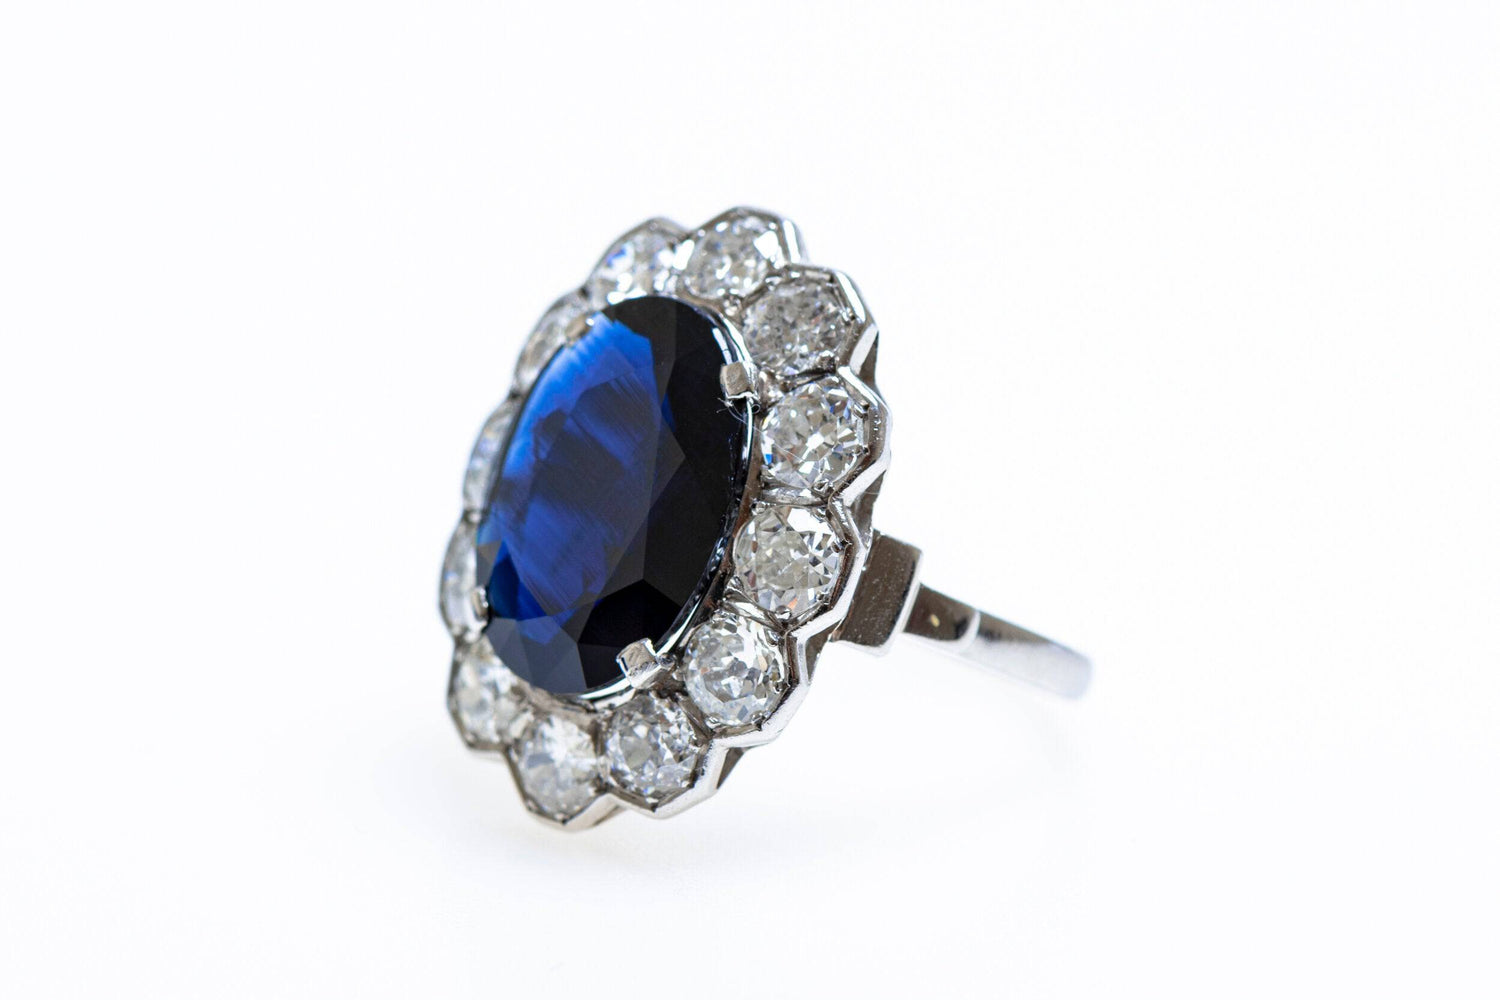 A remarkable Oval Sapphire & Diamond Cluster Ring mounted in Platinum, French, Circa 1935 - Robin Haydock Antiques